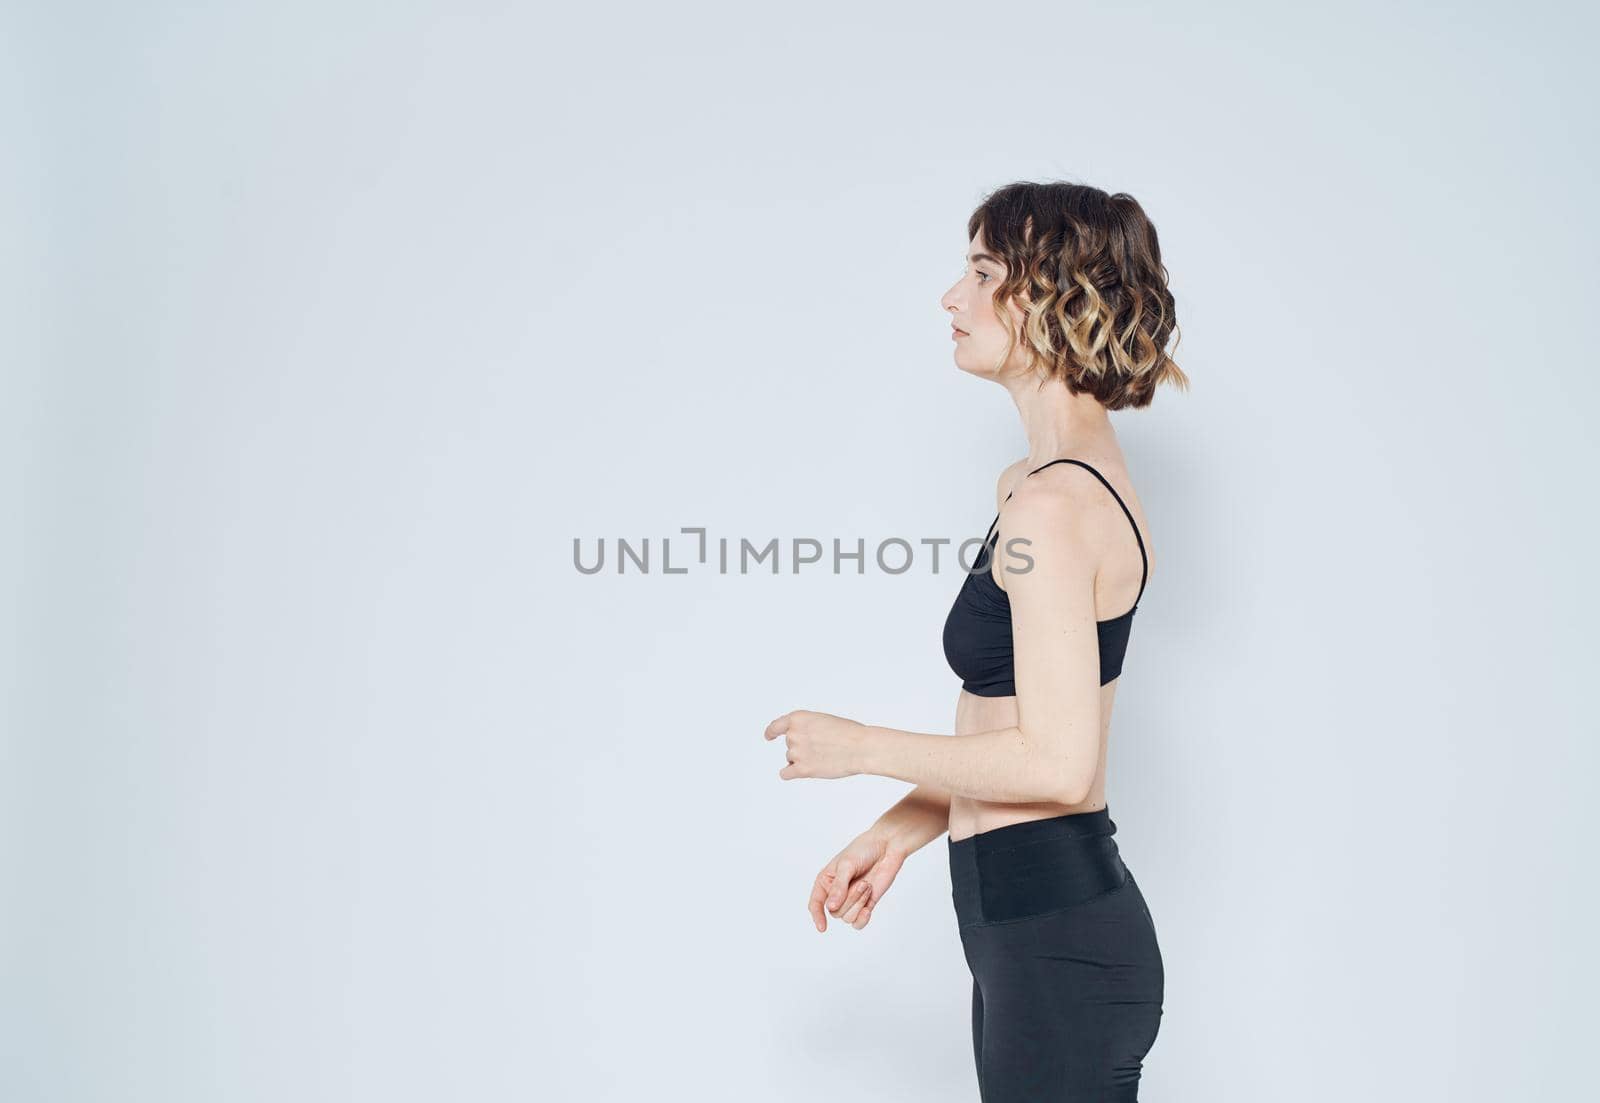 A sportive woman is doing exercises on a light background gesturing with her hands by SHOTPRIME